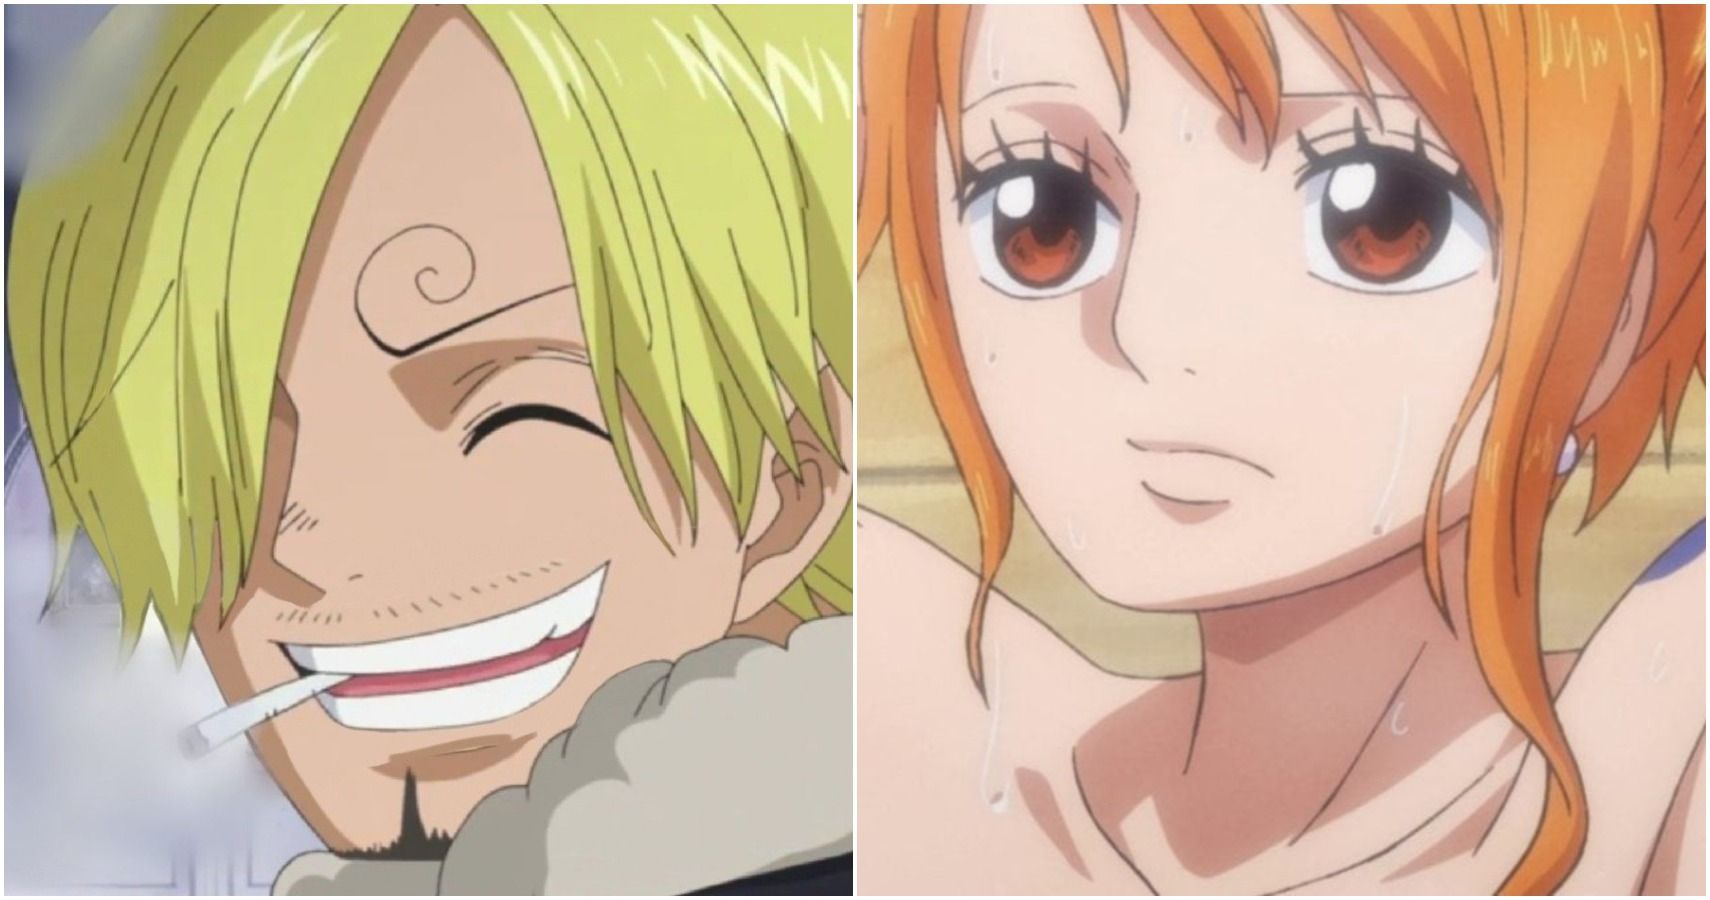 split image: Sanji and Nami from One Piece